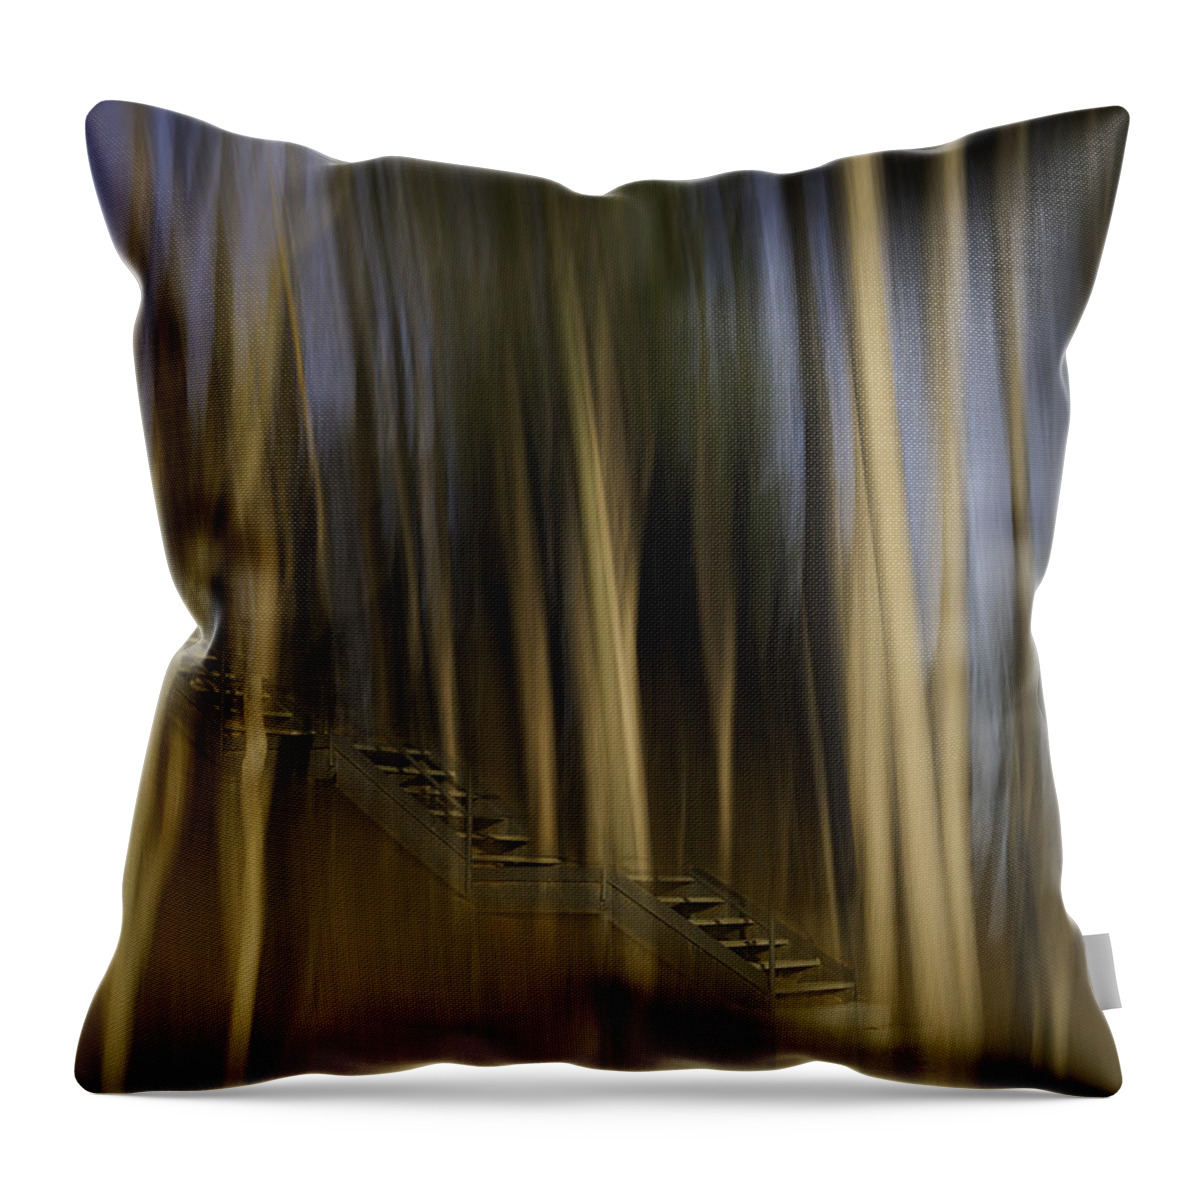 Abstract Throw Pillow featuring the photograph Climbing Stairs Into The Forest by Thomas Young